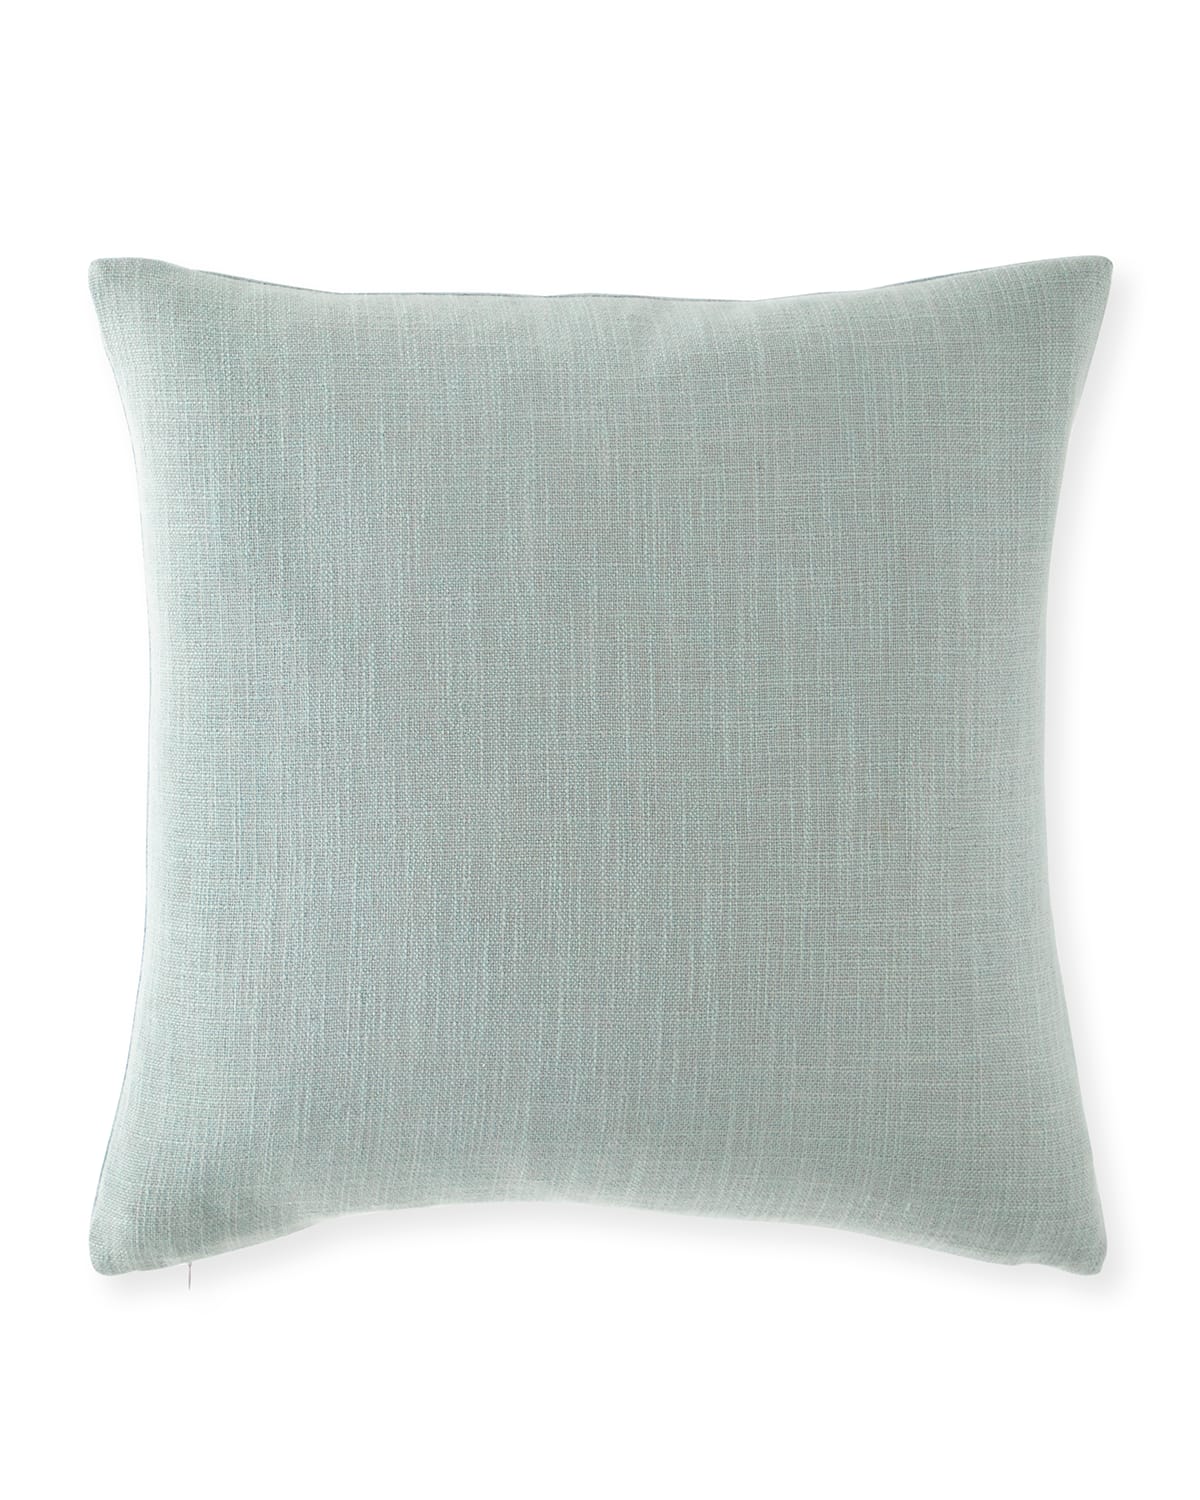 Tl At Home Barrington Spa Feather/down Pillow In Blue